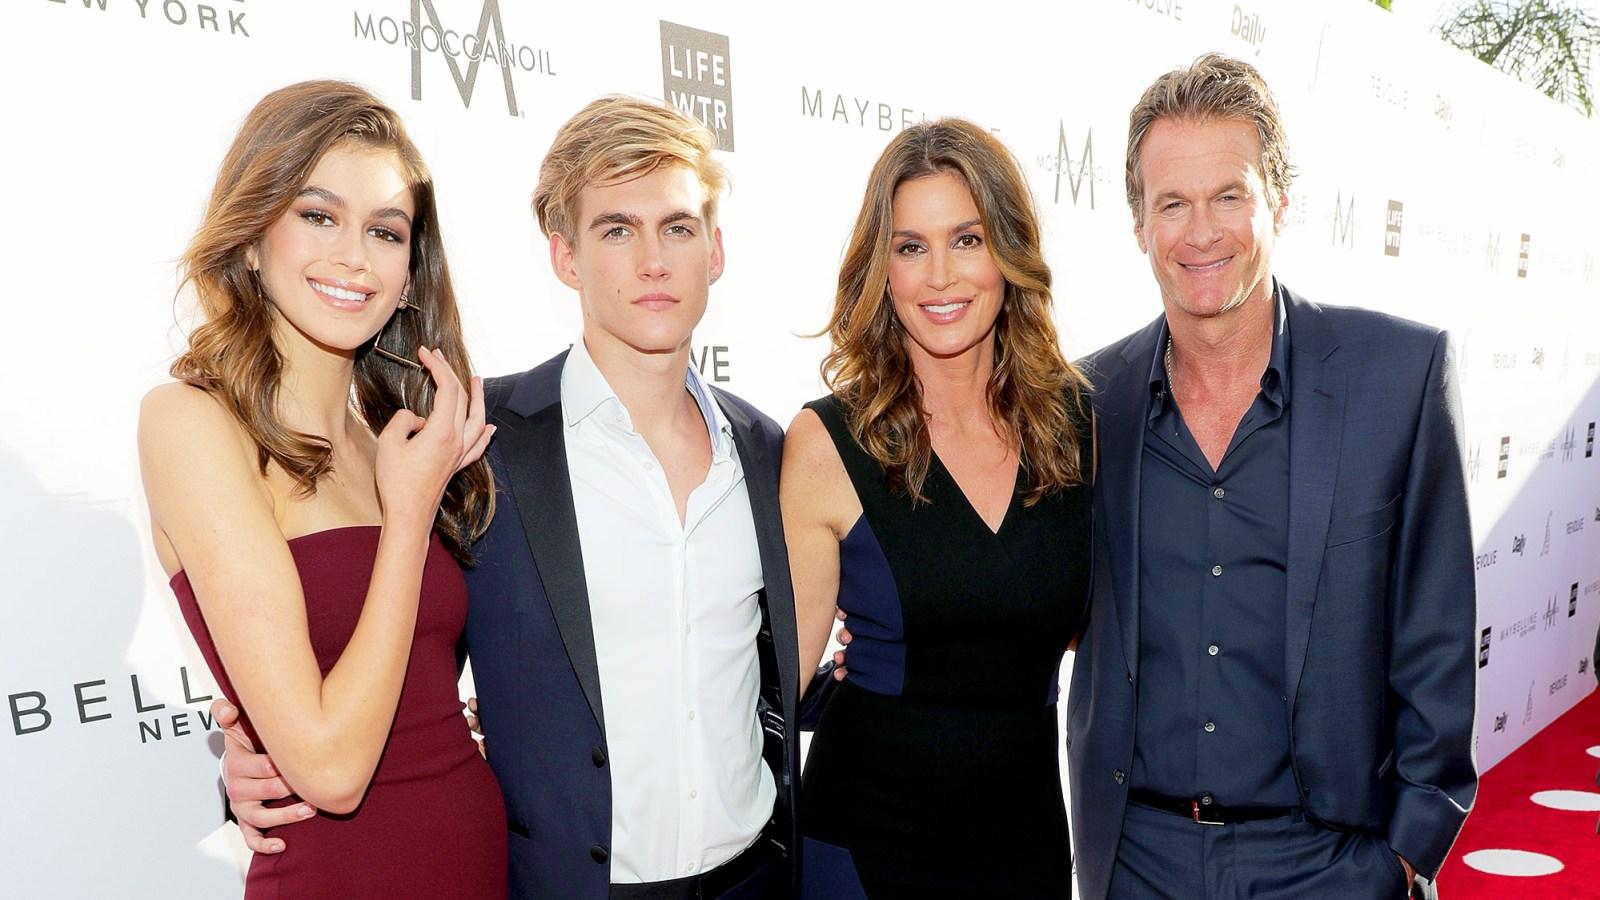 Cindy Crawford and Her Family Turned It Out For the Fashion L.A. Awards